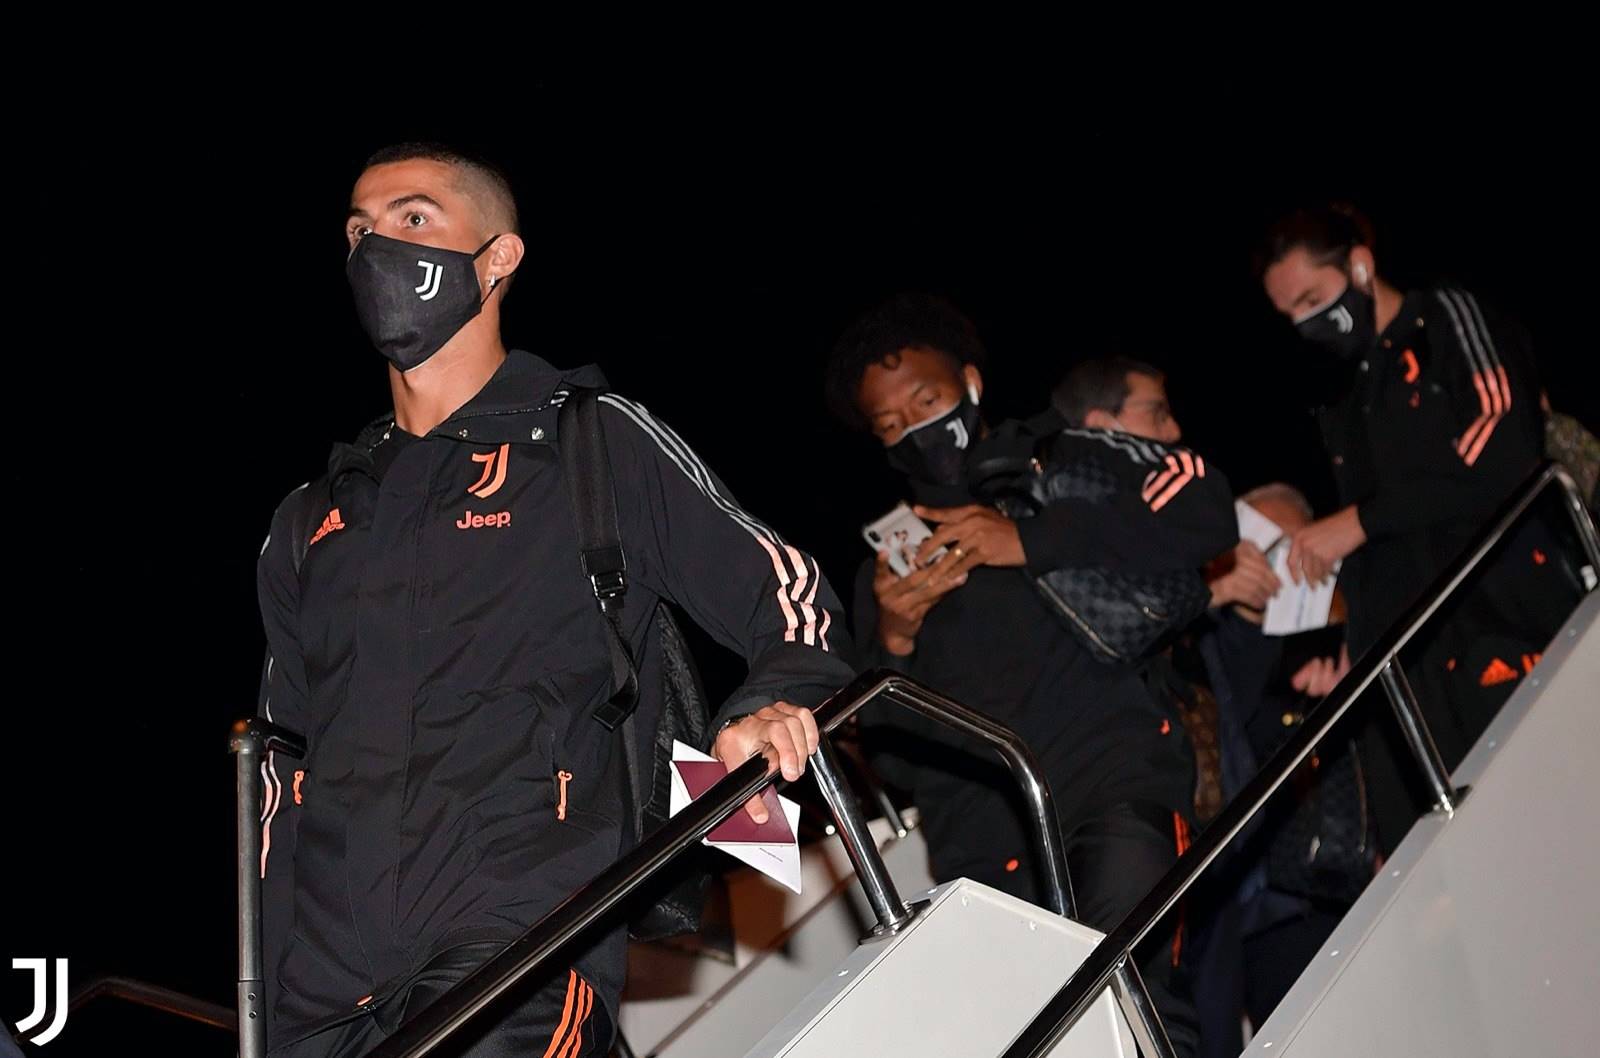 Cristiano Ronaldo and his Juventus team-mates land in Budapest, Hungary, ahead of the team’s Champions League game against Ferencváros on Wednesday night Picture: Juventus twitter